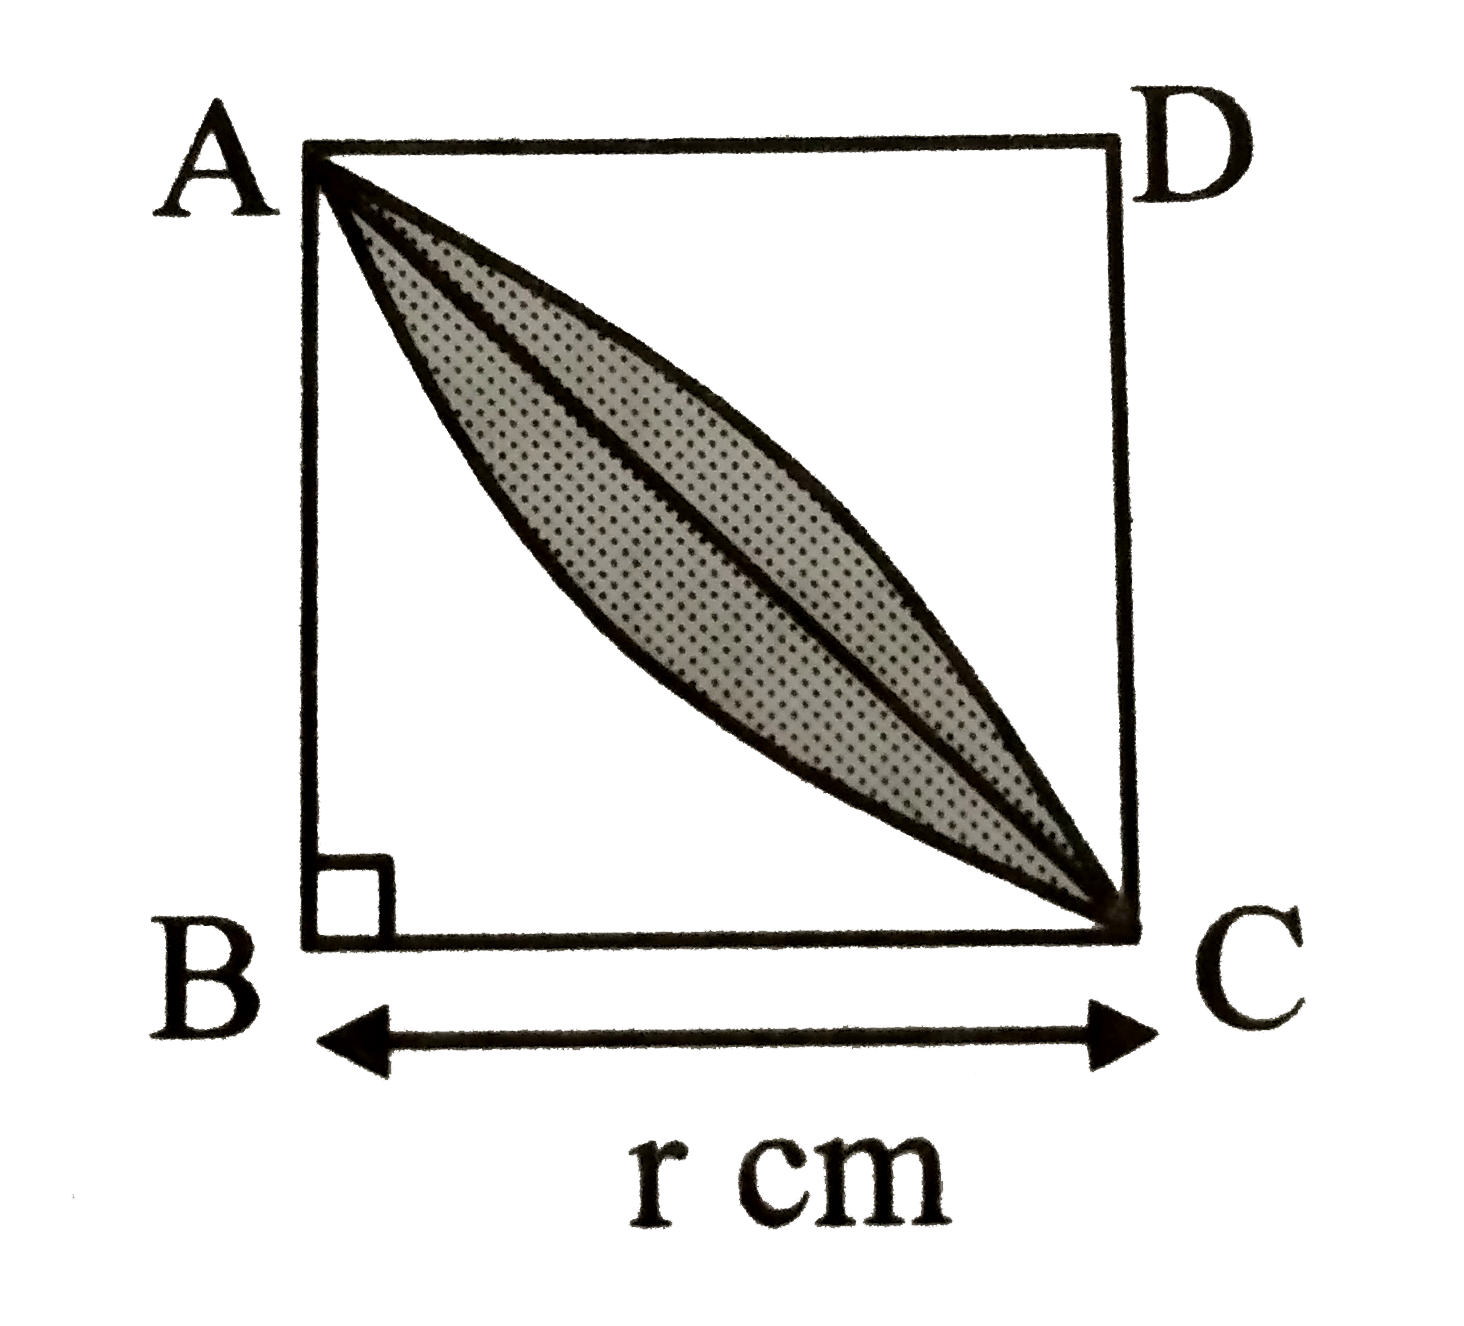 If square ABCD is a square, then the area of the  shaded region shown in  the figure is